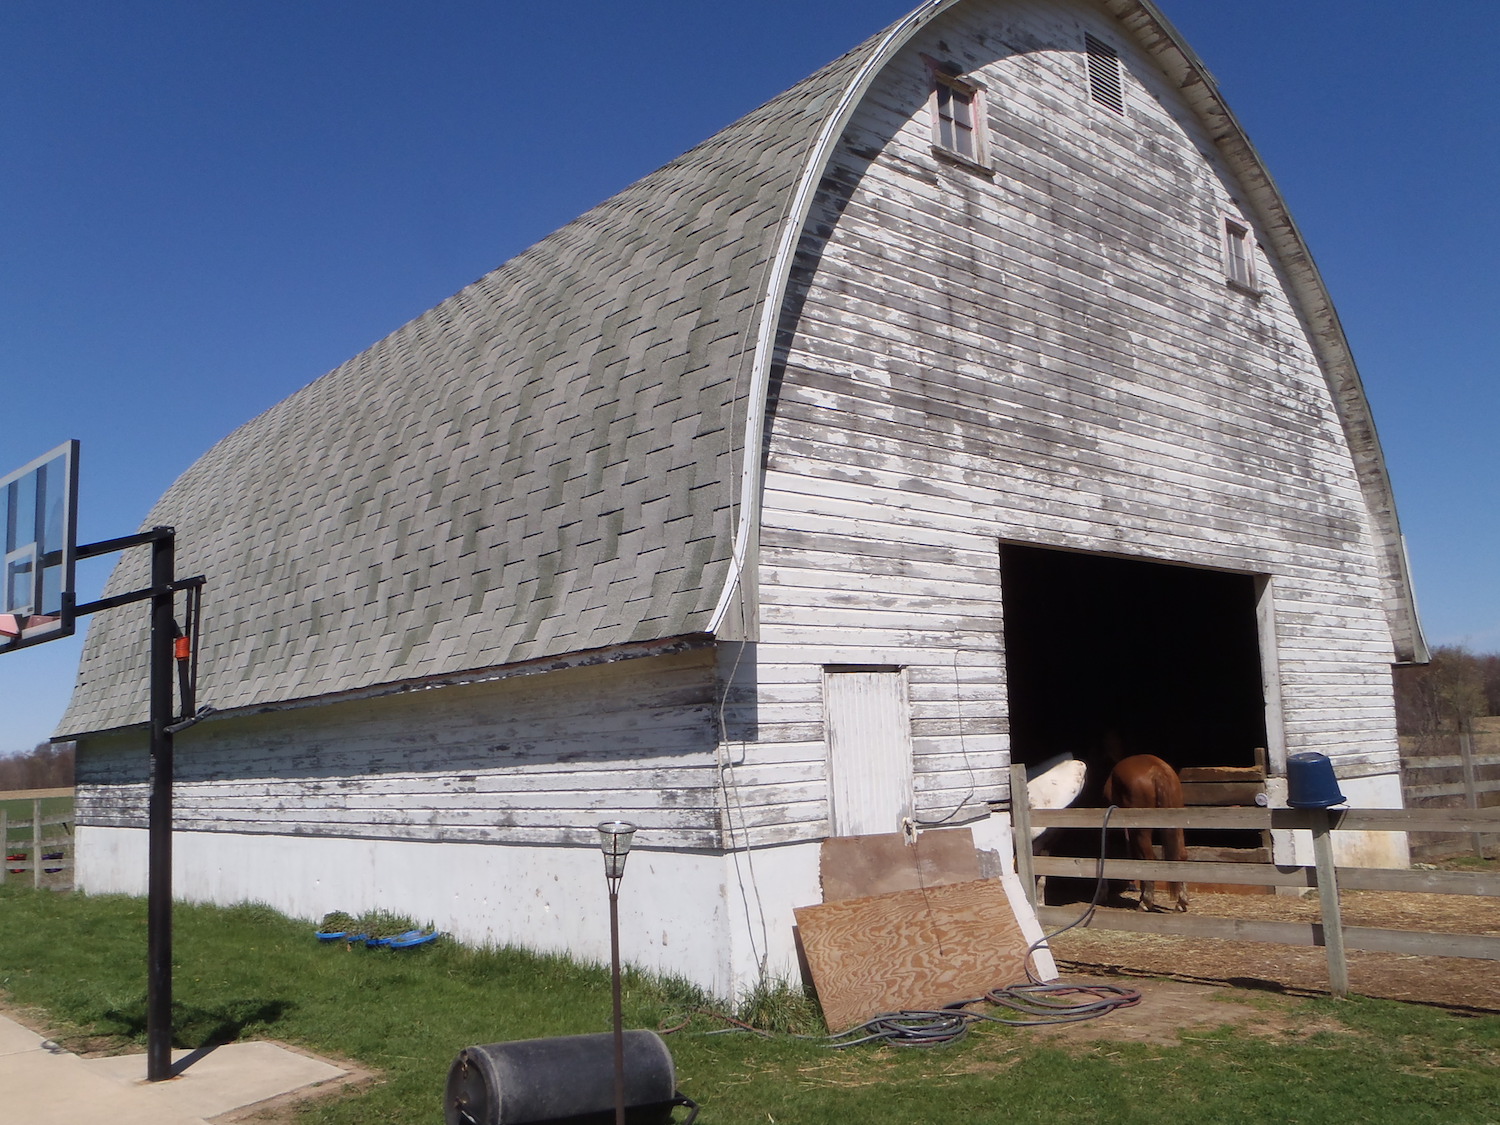 A barn in East Leroy, Michigan with a classic gothic roofline